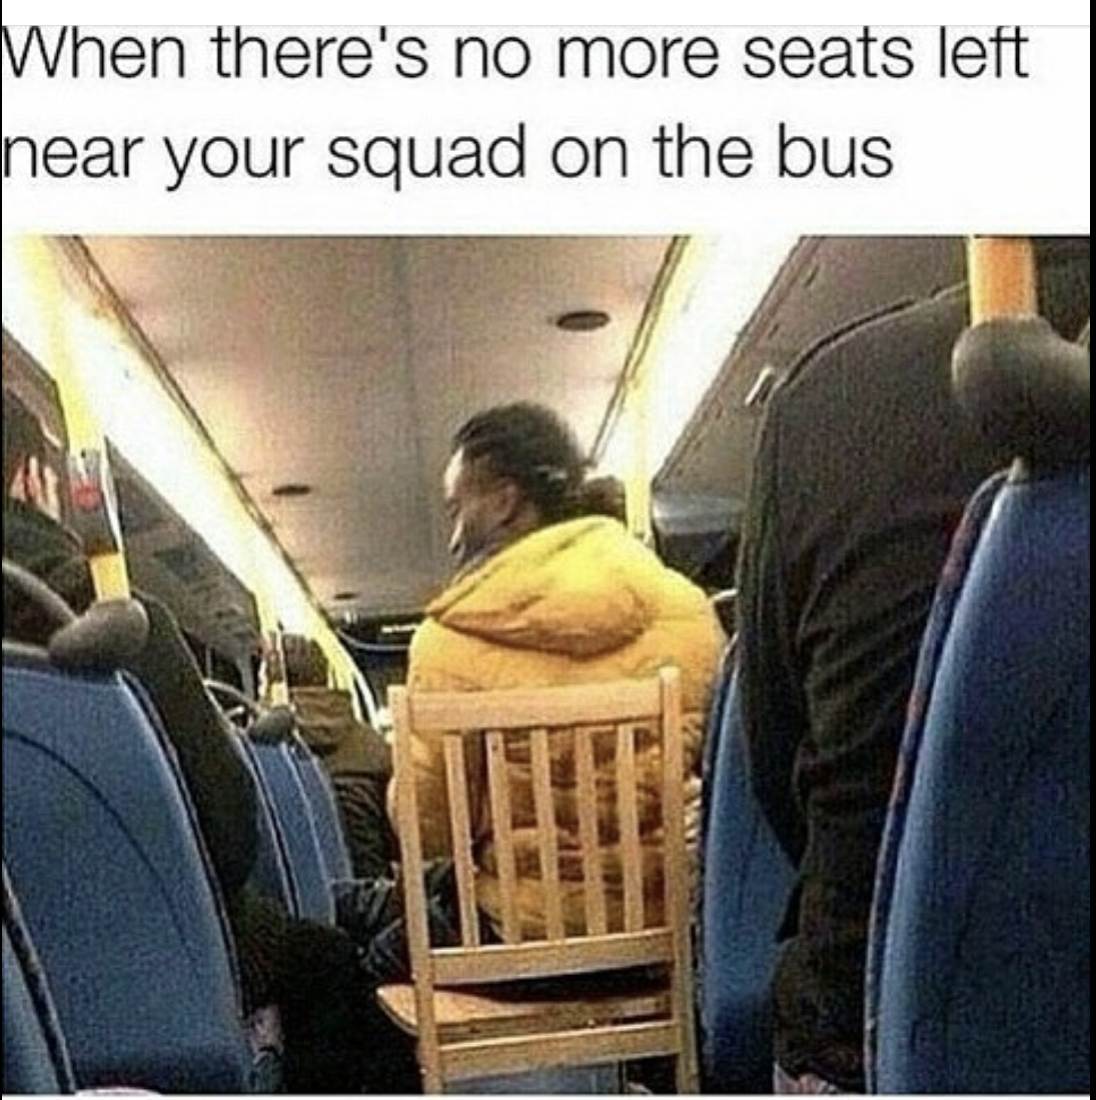 nigga brought his chair to the bus - When there's no more seats left near your squad on the bus